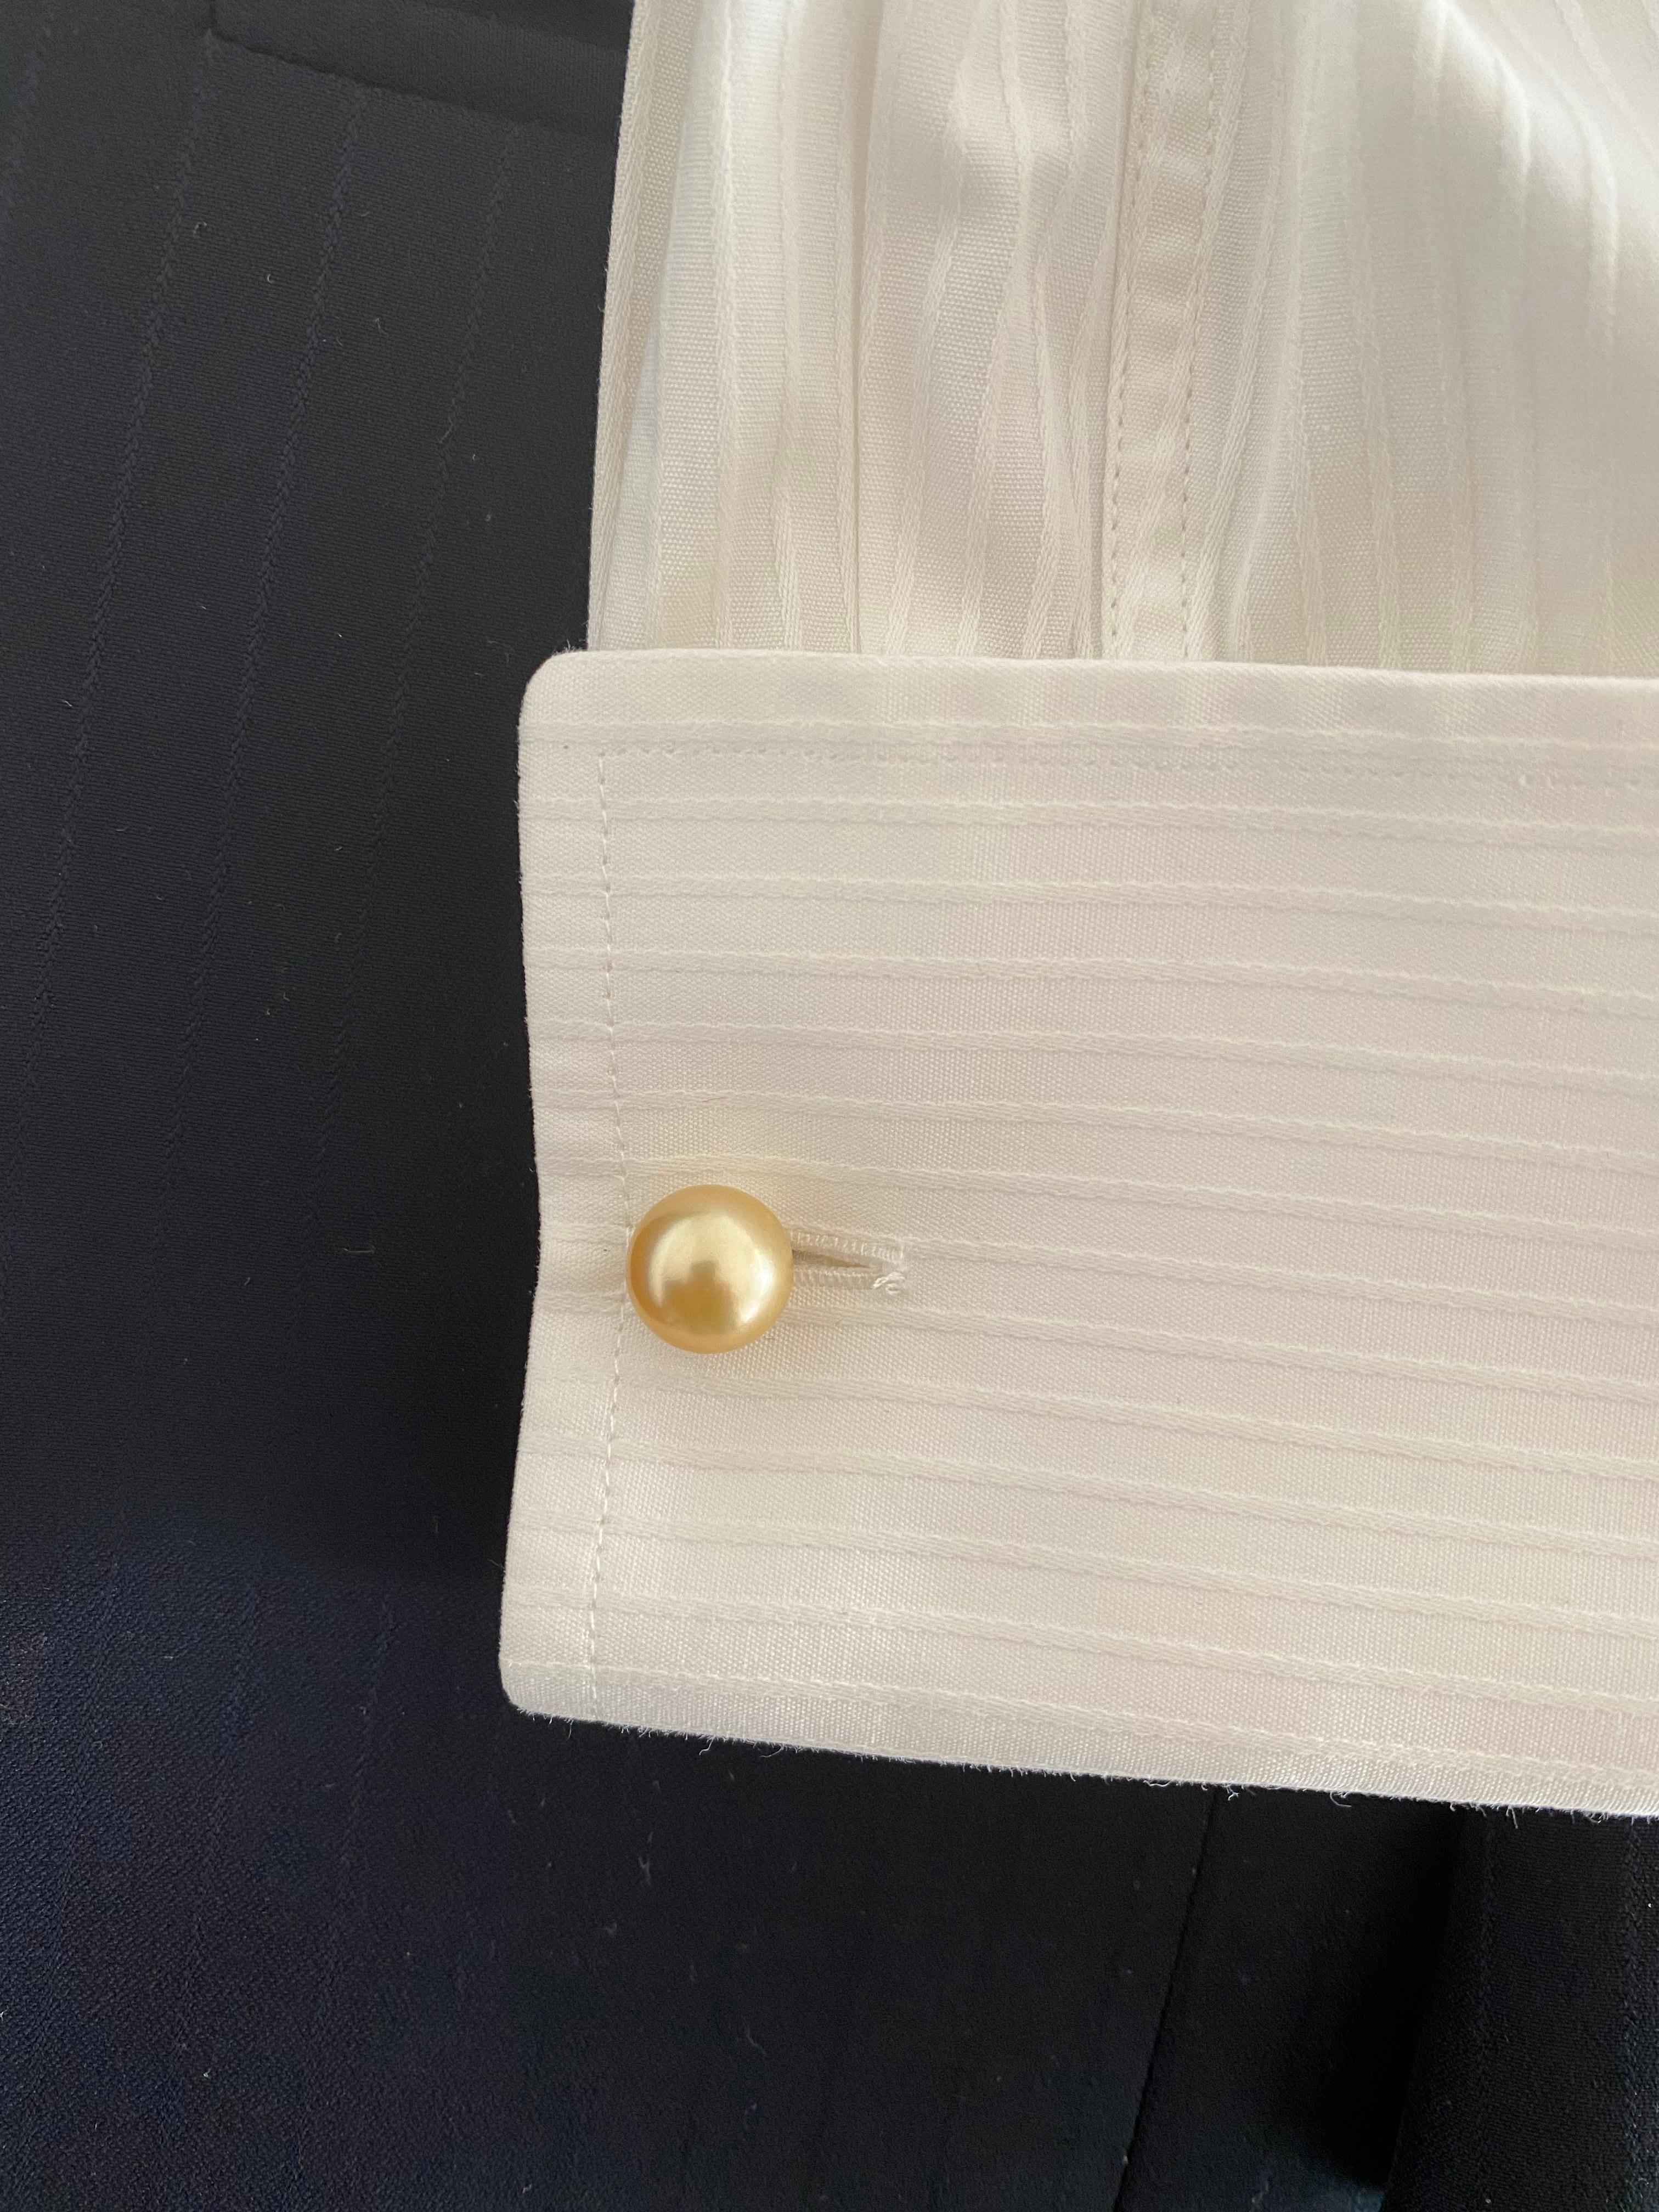 White Diamond South Sea Pearl 18 Karat Gold Cufflinks Made in Italy For Sale 4